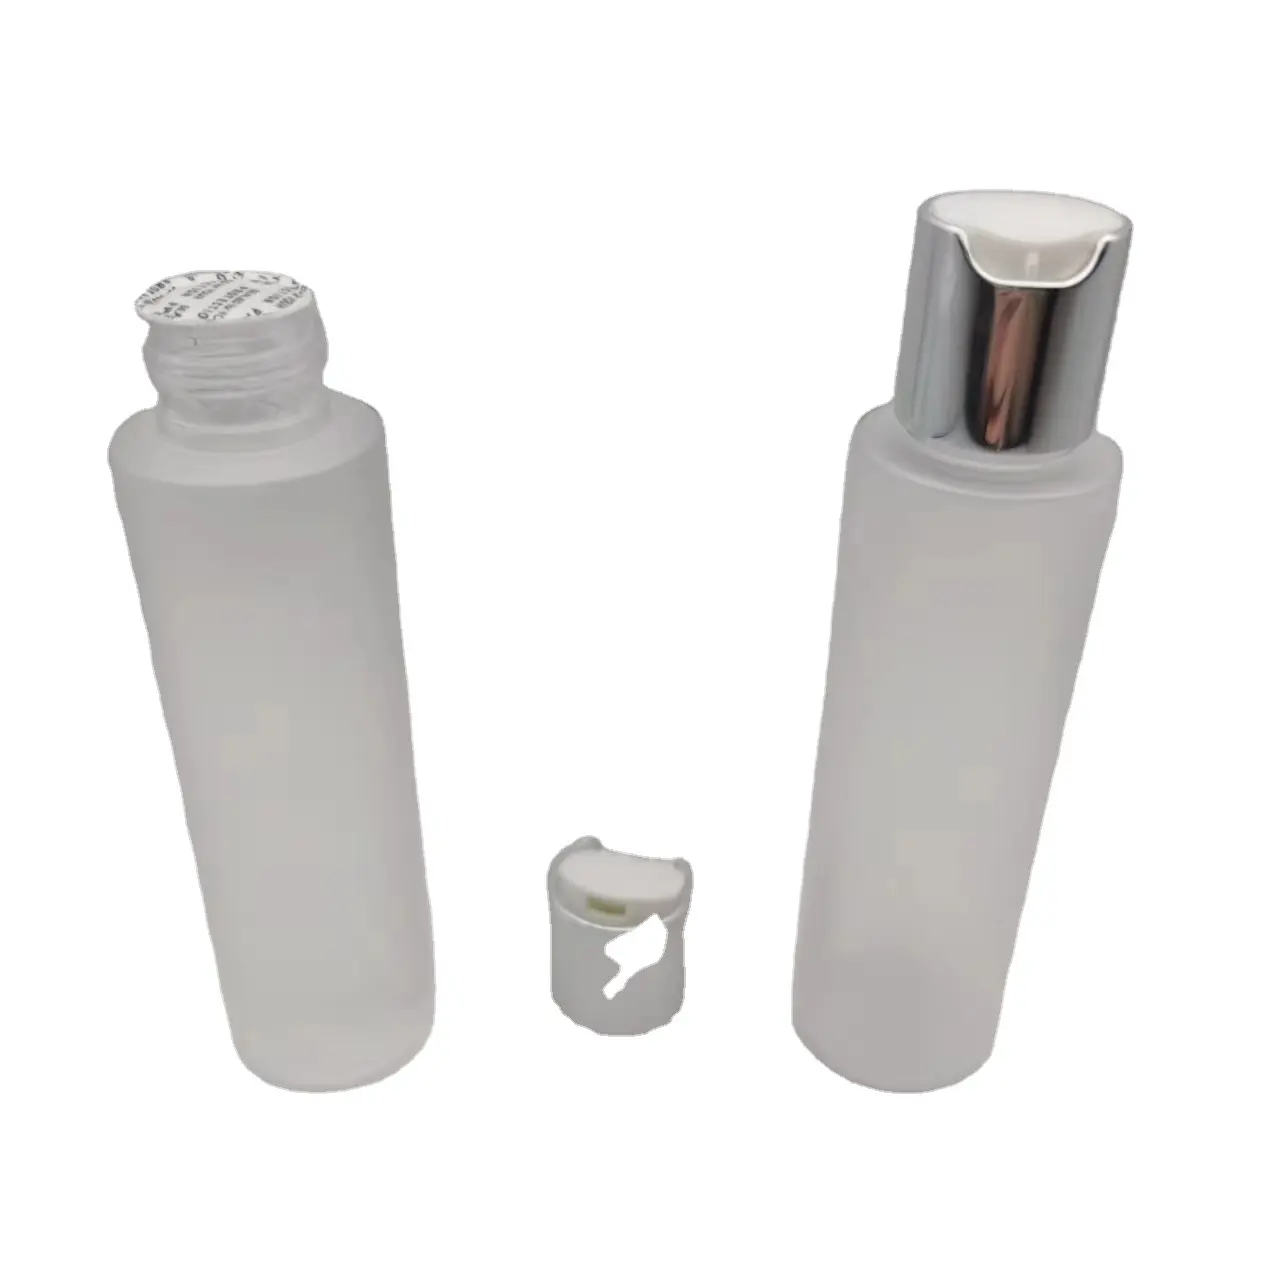 HOT Manufacturers sell soft touch bottles boston round bottle imperial evolution bottle